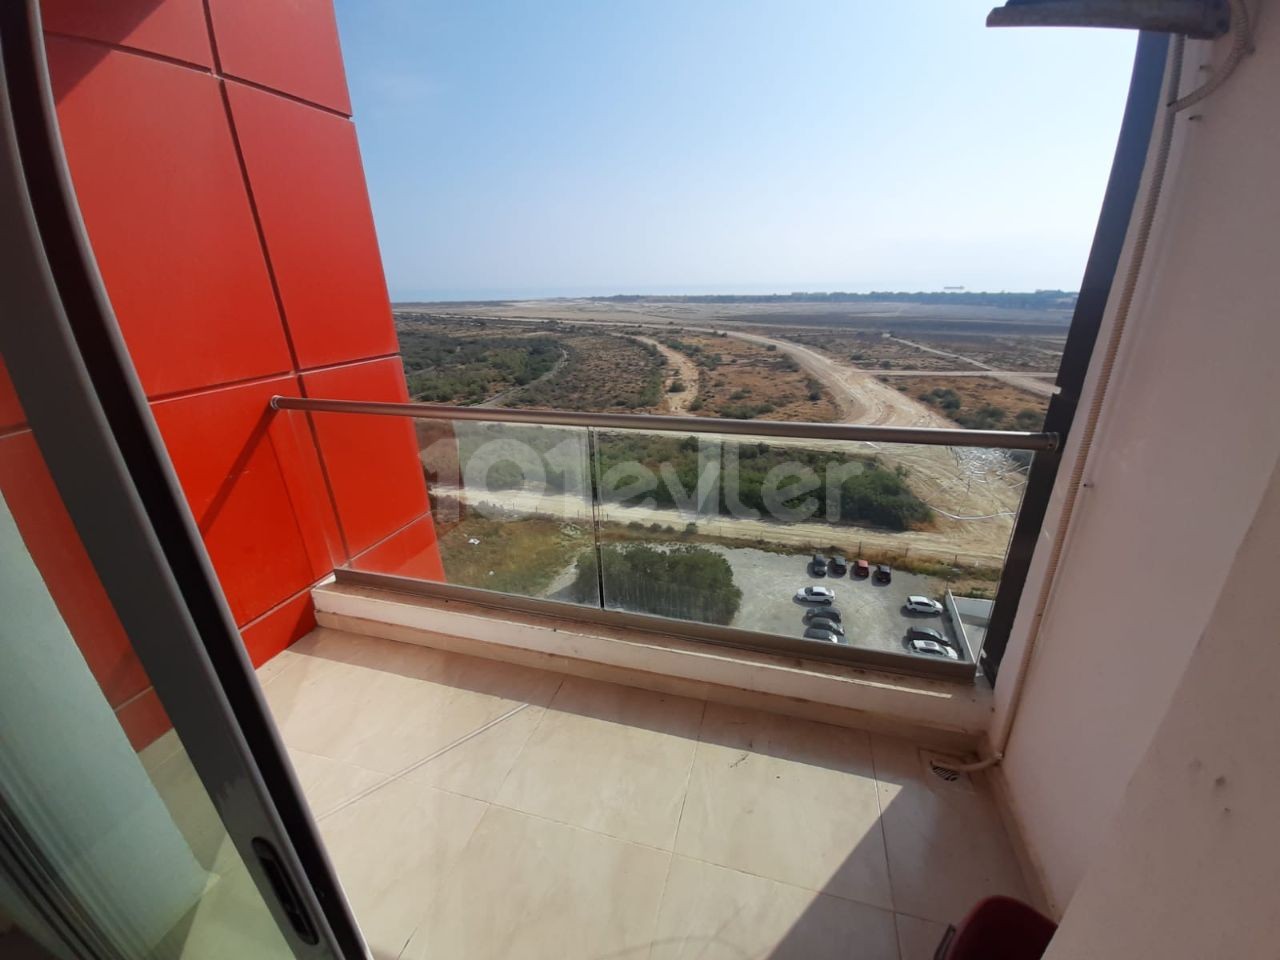 Famagusta close to emu 10 months payment 2 + 1 rent house 4000 $ rent deposit 400$ Commission 400$ ** 